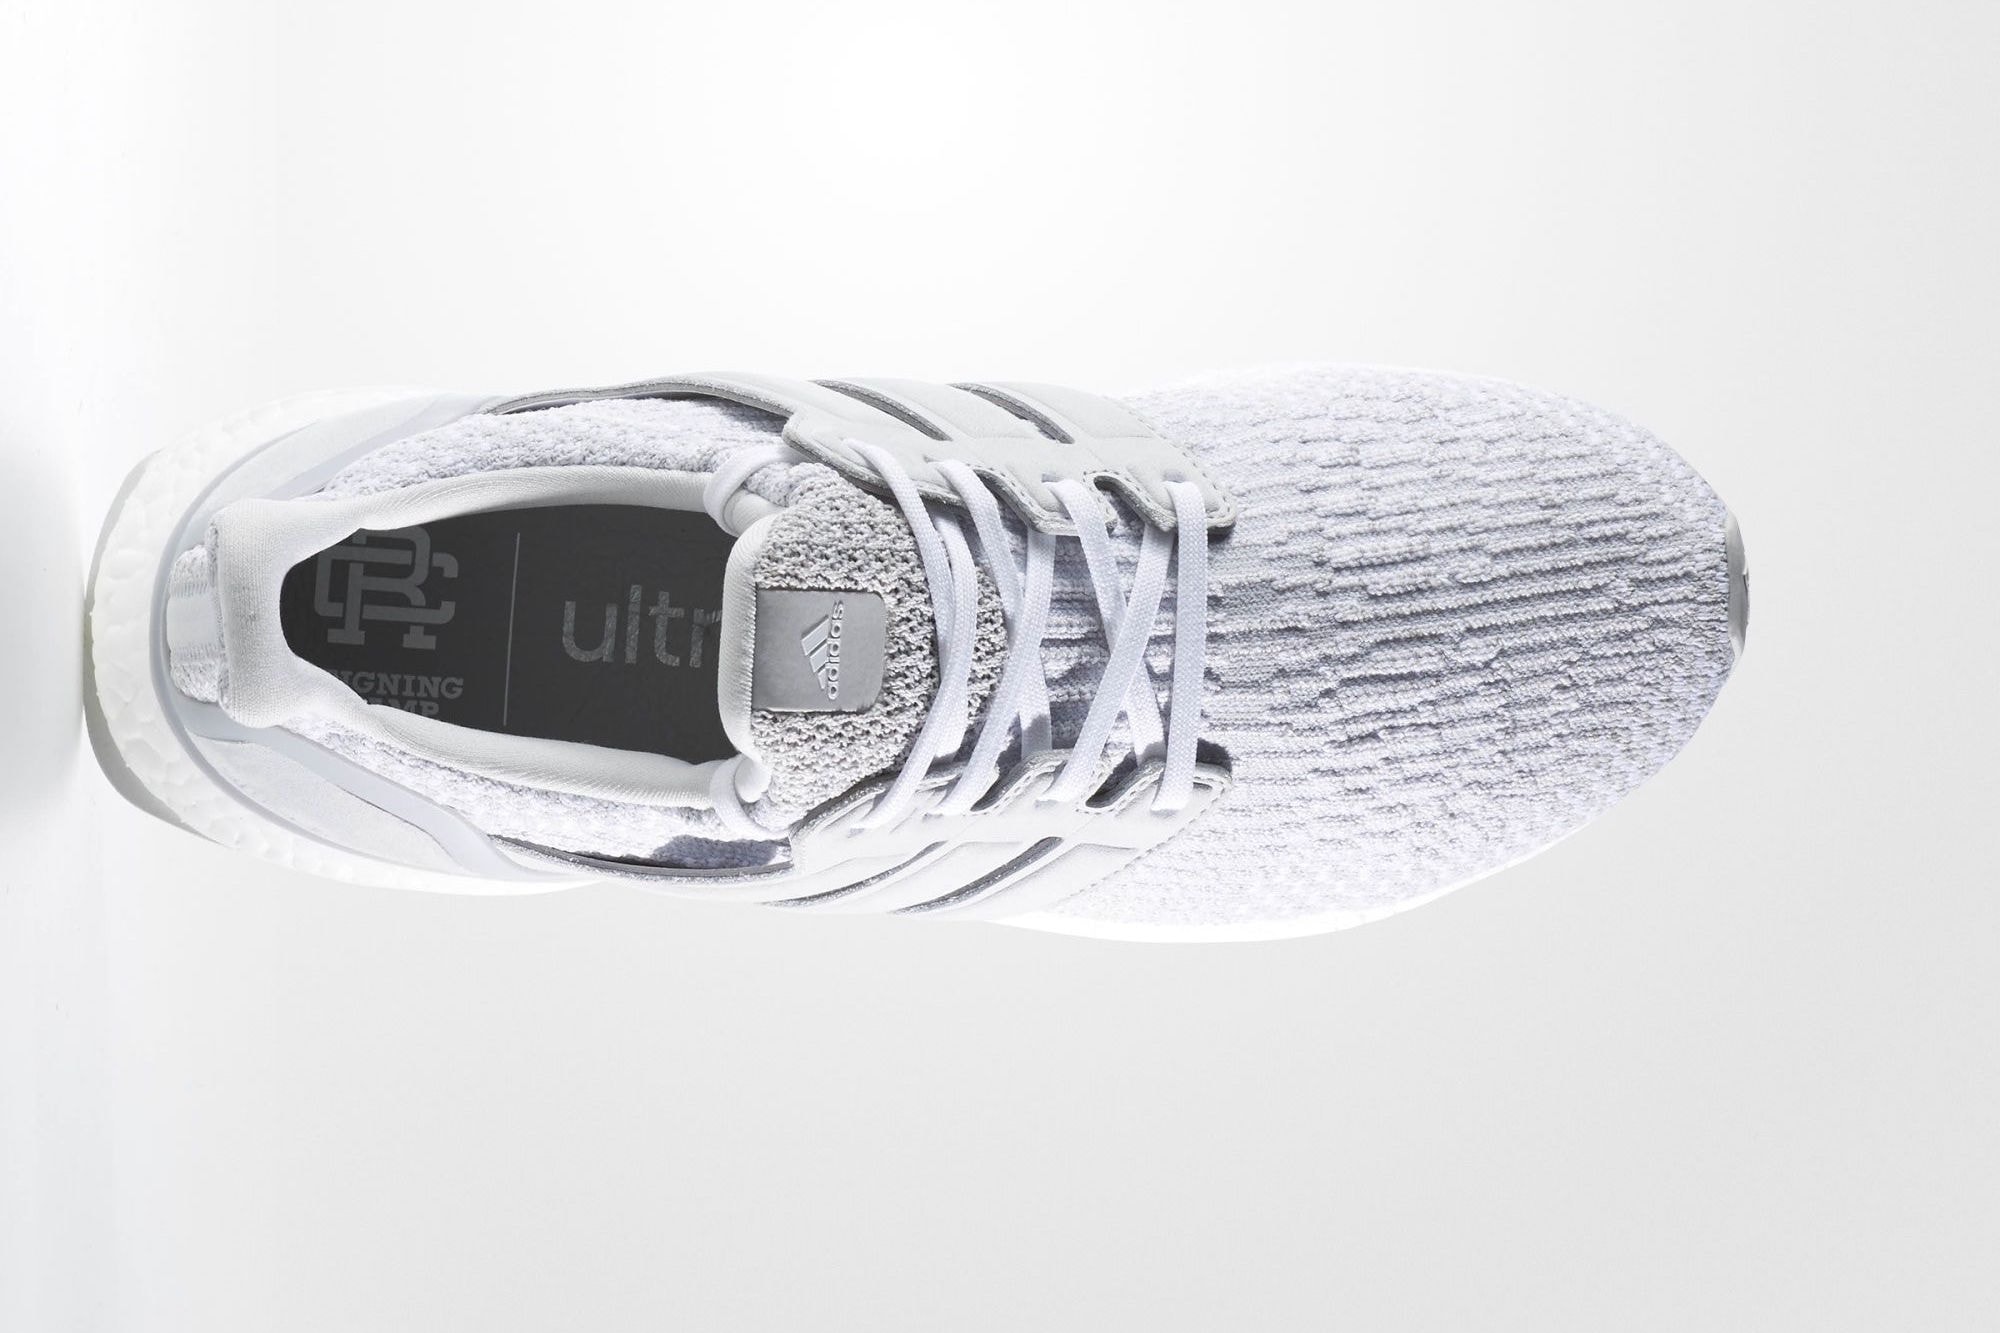 Reigning Champ x adidas 2017 UltraBOOST 3.0 Official Look